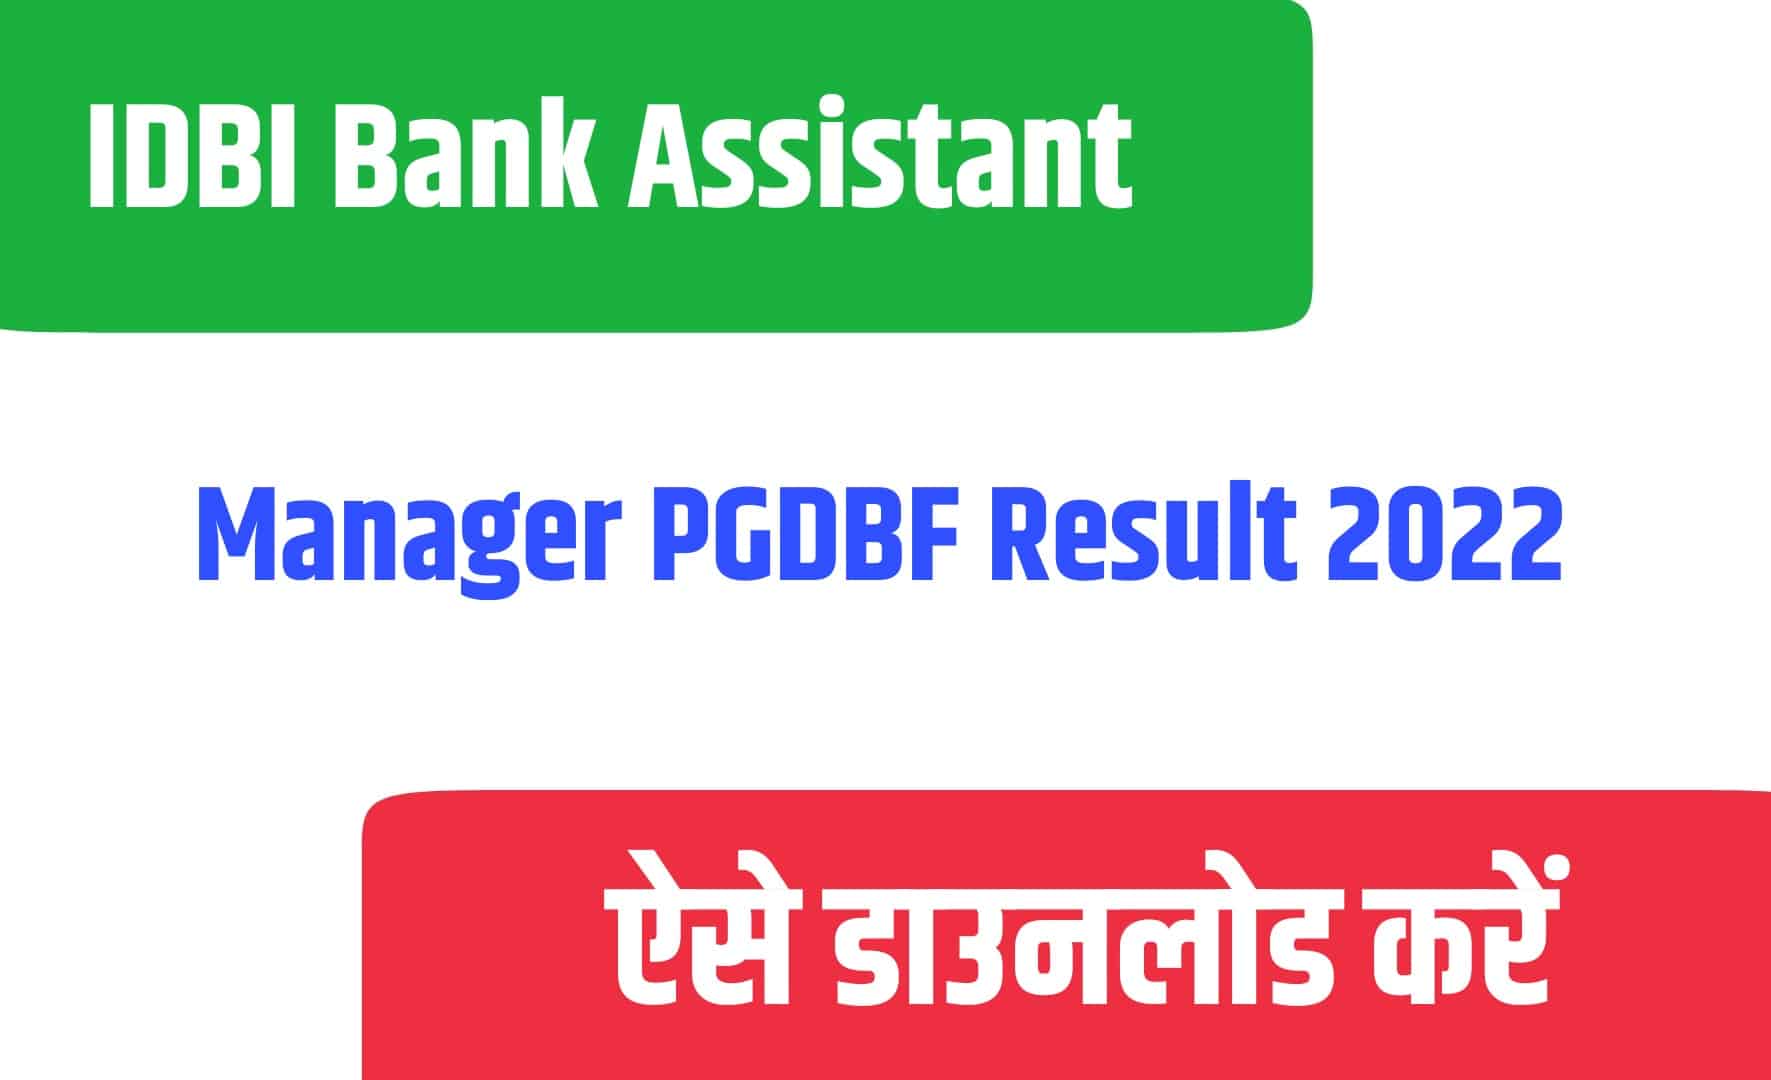 IDBI Bank Assistant Manager PGDBF Result 2022